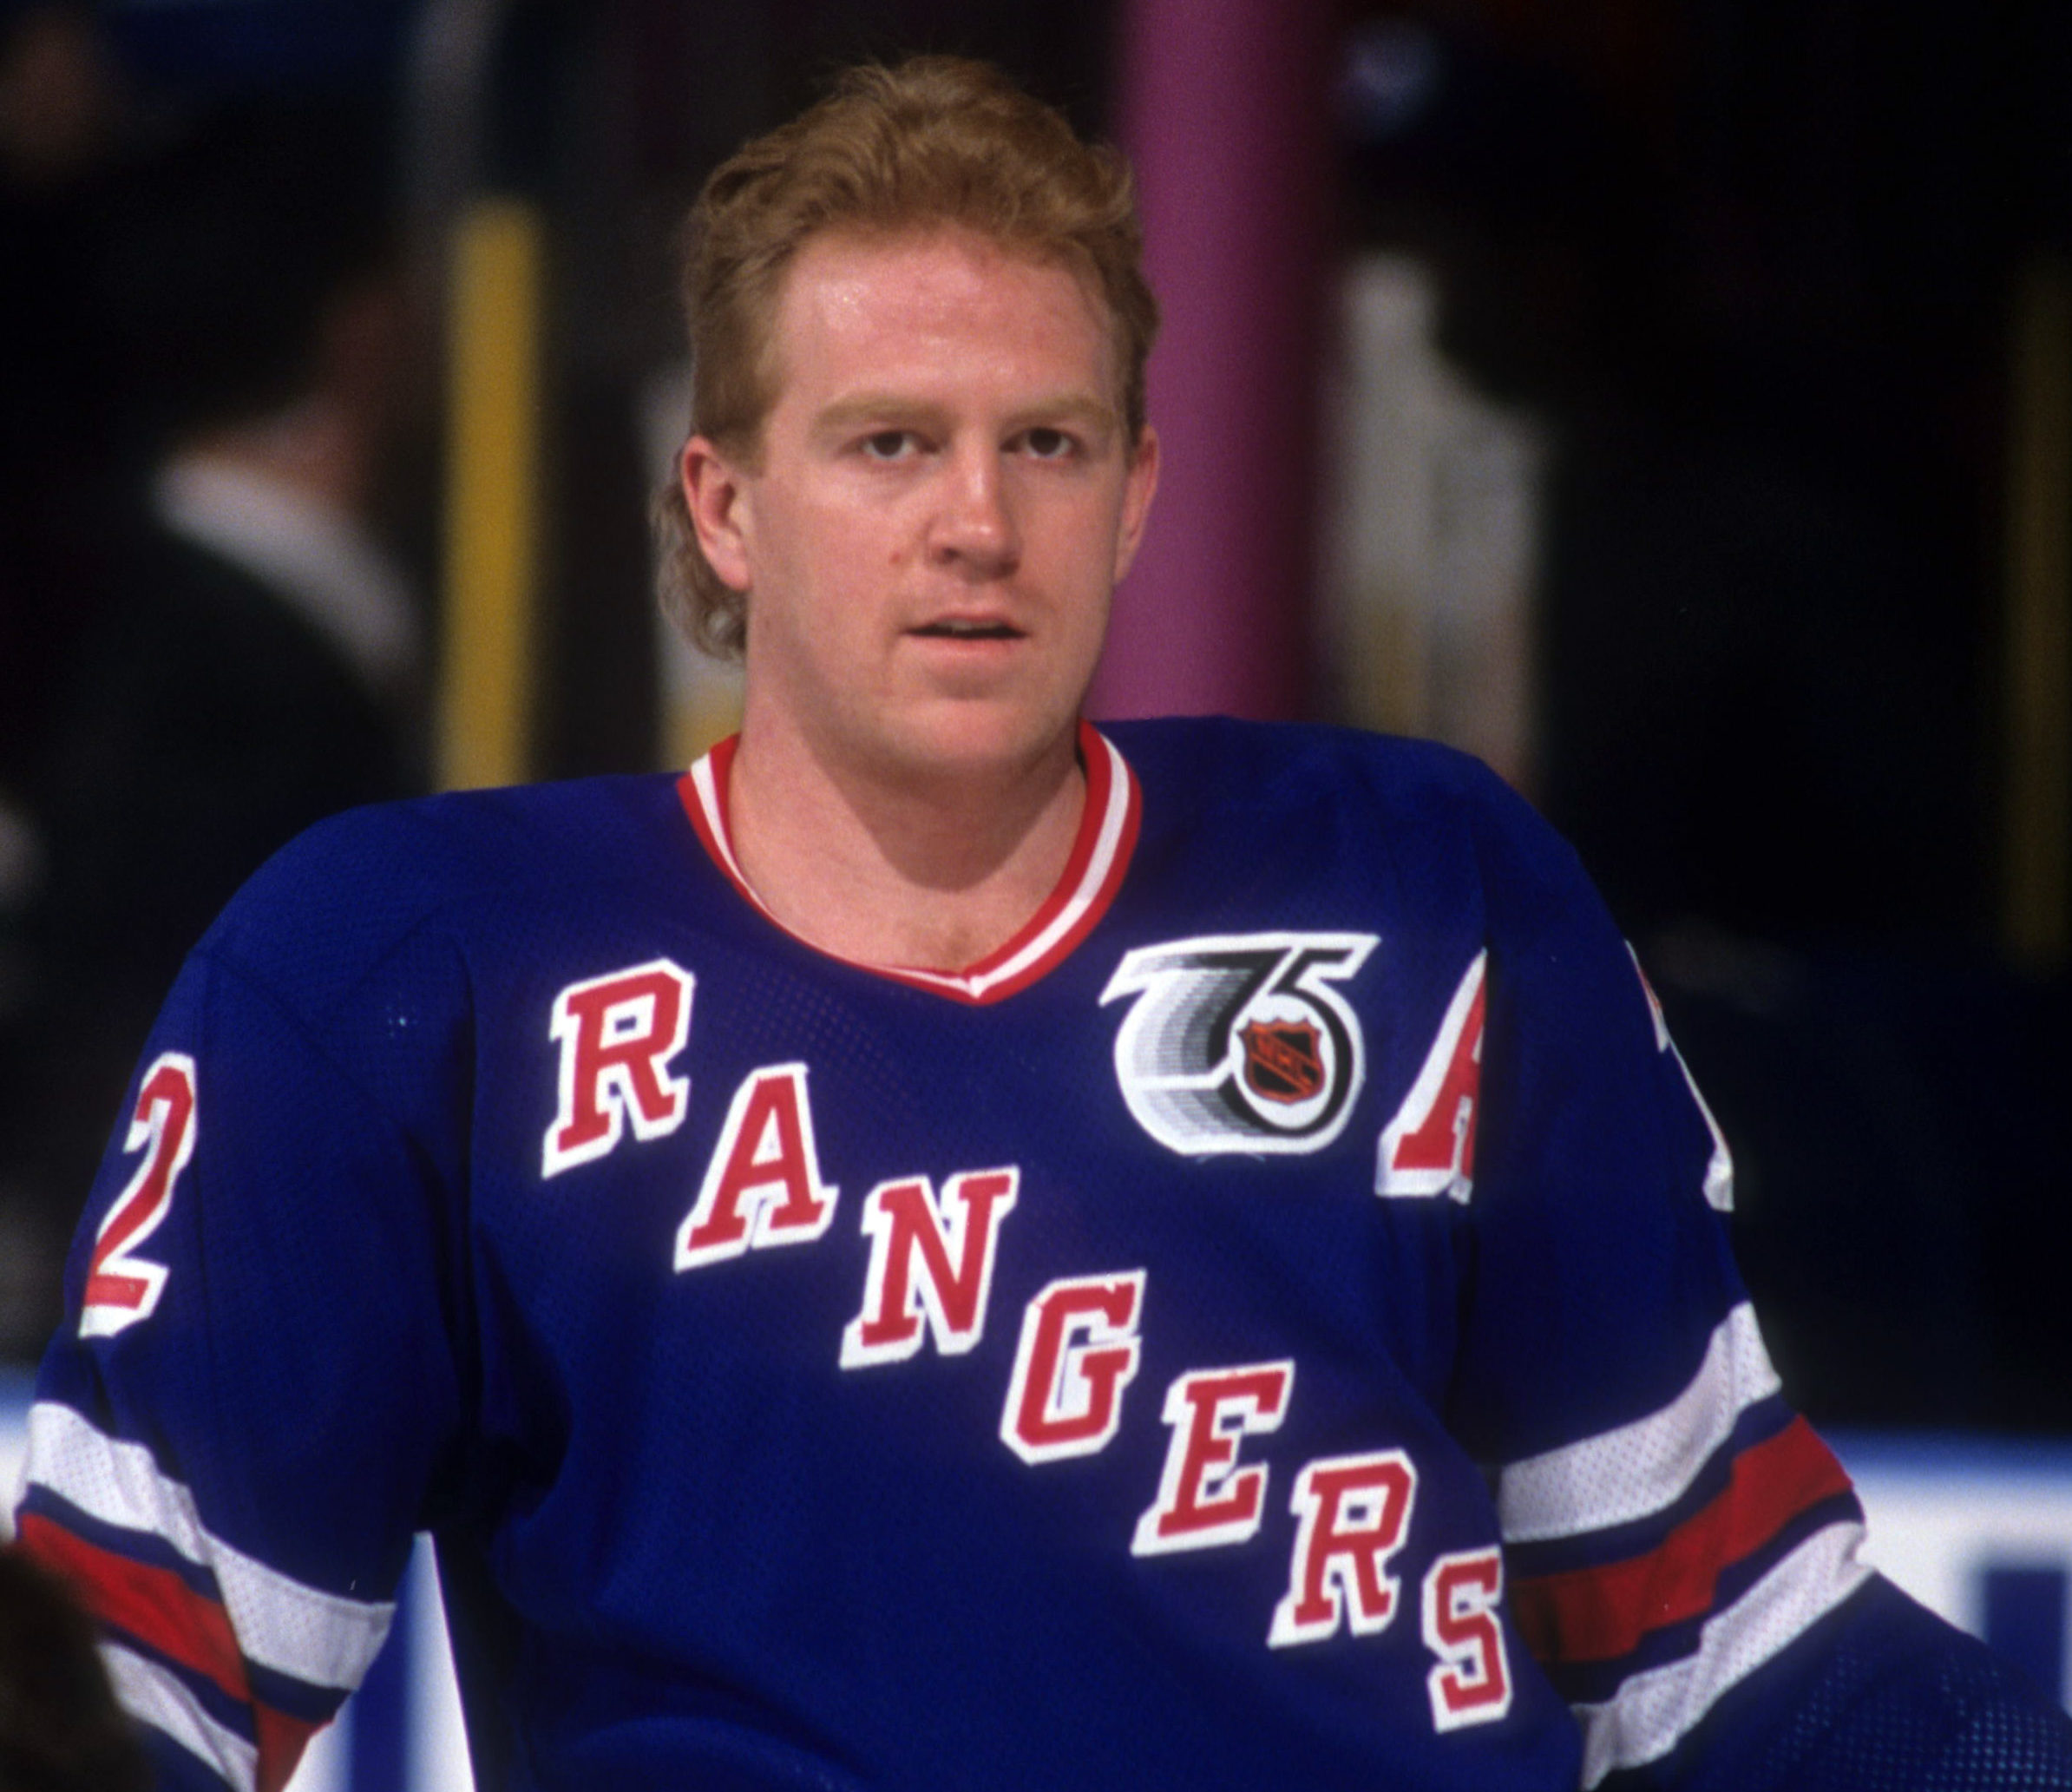 NEW YORK, NY - 1992: Brian Leetch #2 of the New York Rangers skates on the ice before an NHL game in 1992 at the Madison Square Garden in New York, New York. (Photo by B Bennett/Getty Images)